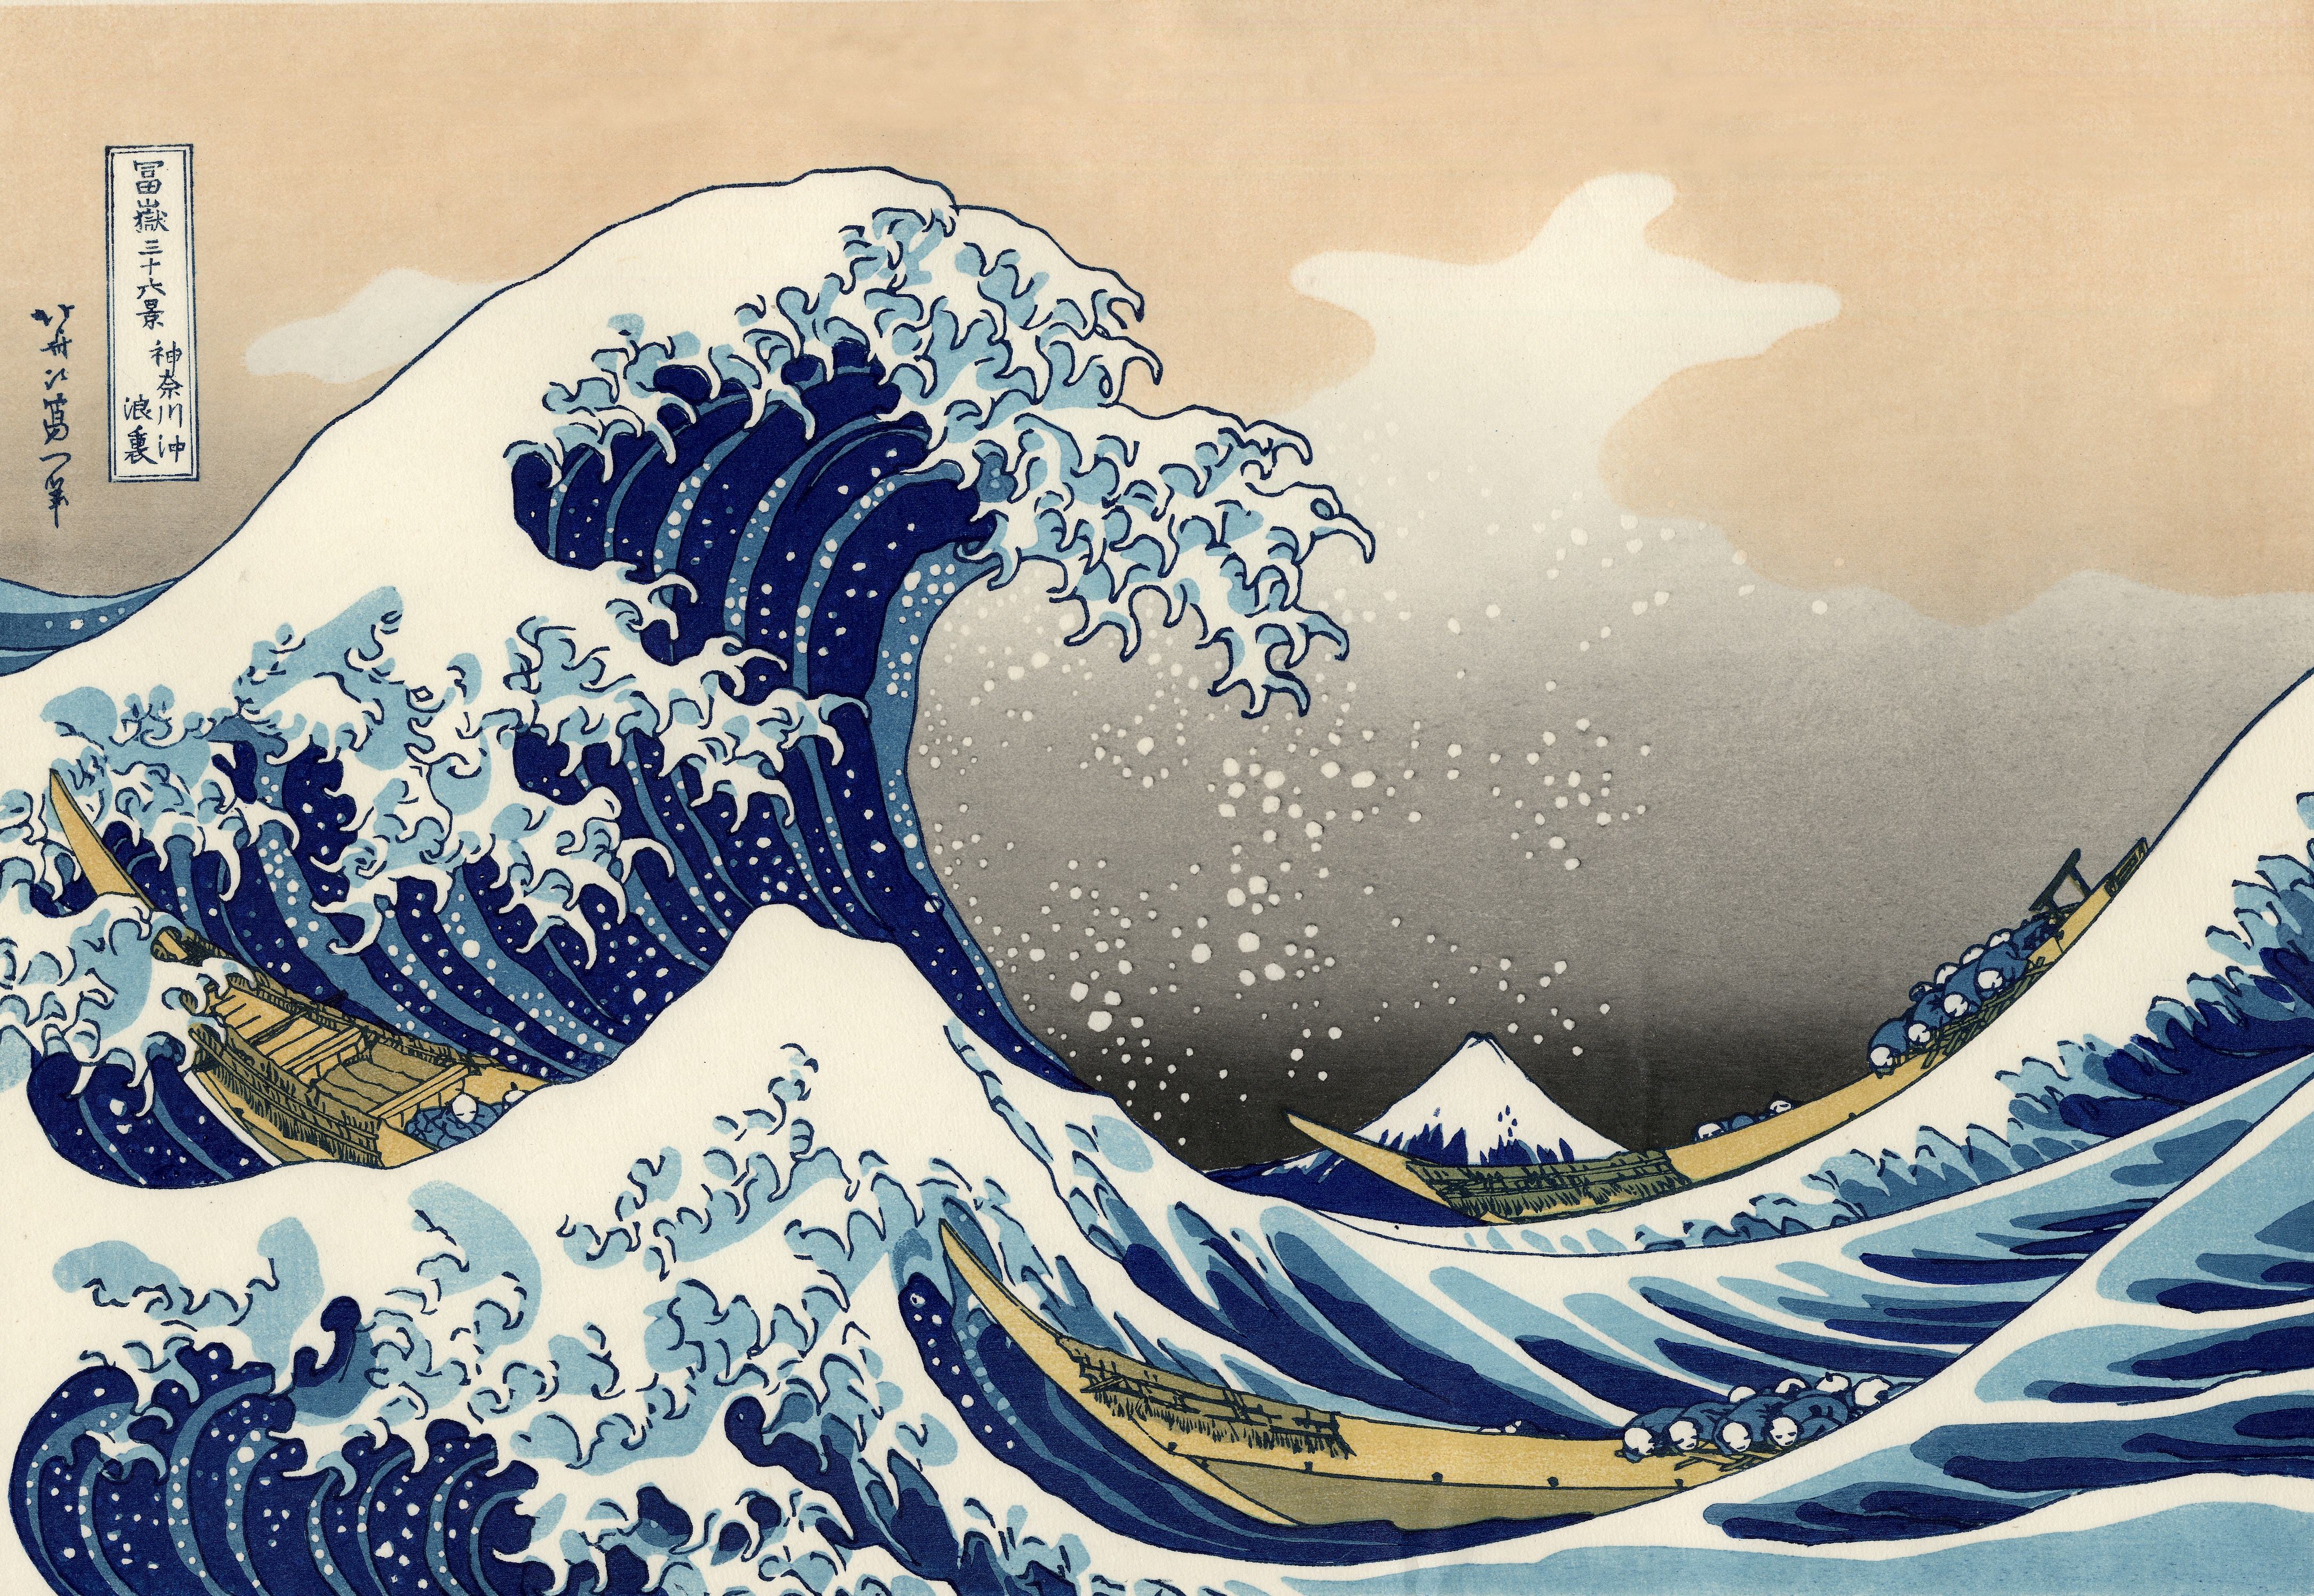 9 Awesome Wave Wallpapers to Decorate Backgrounds Like an Apple